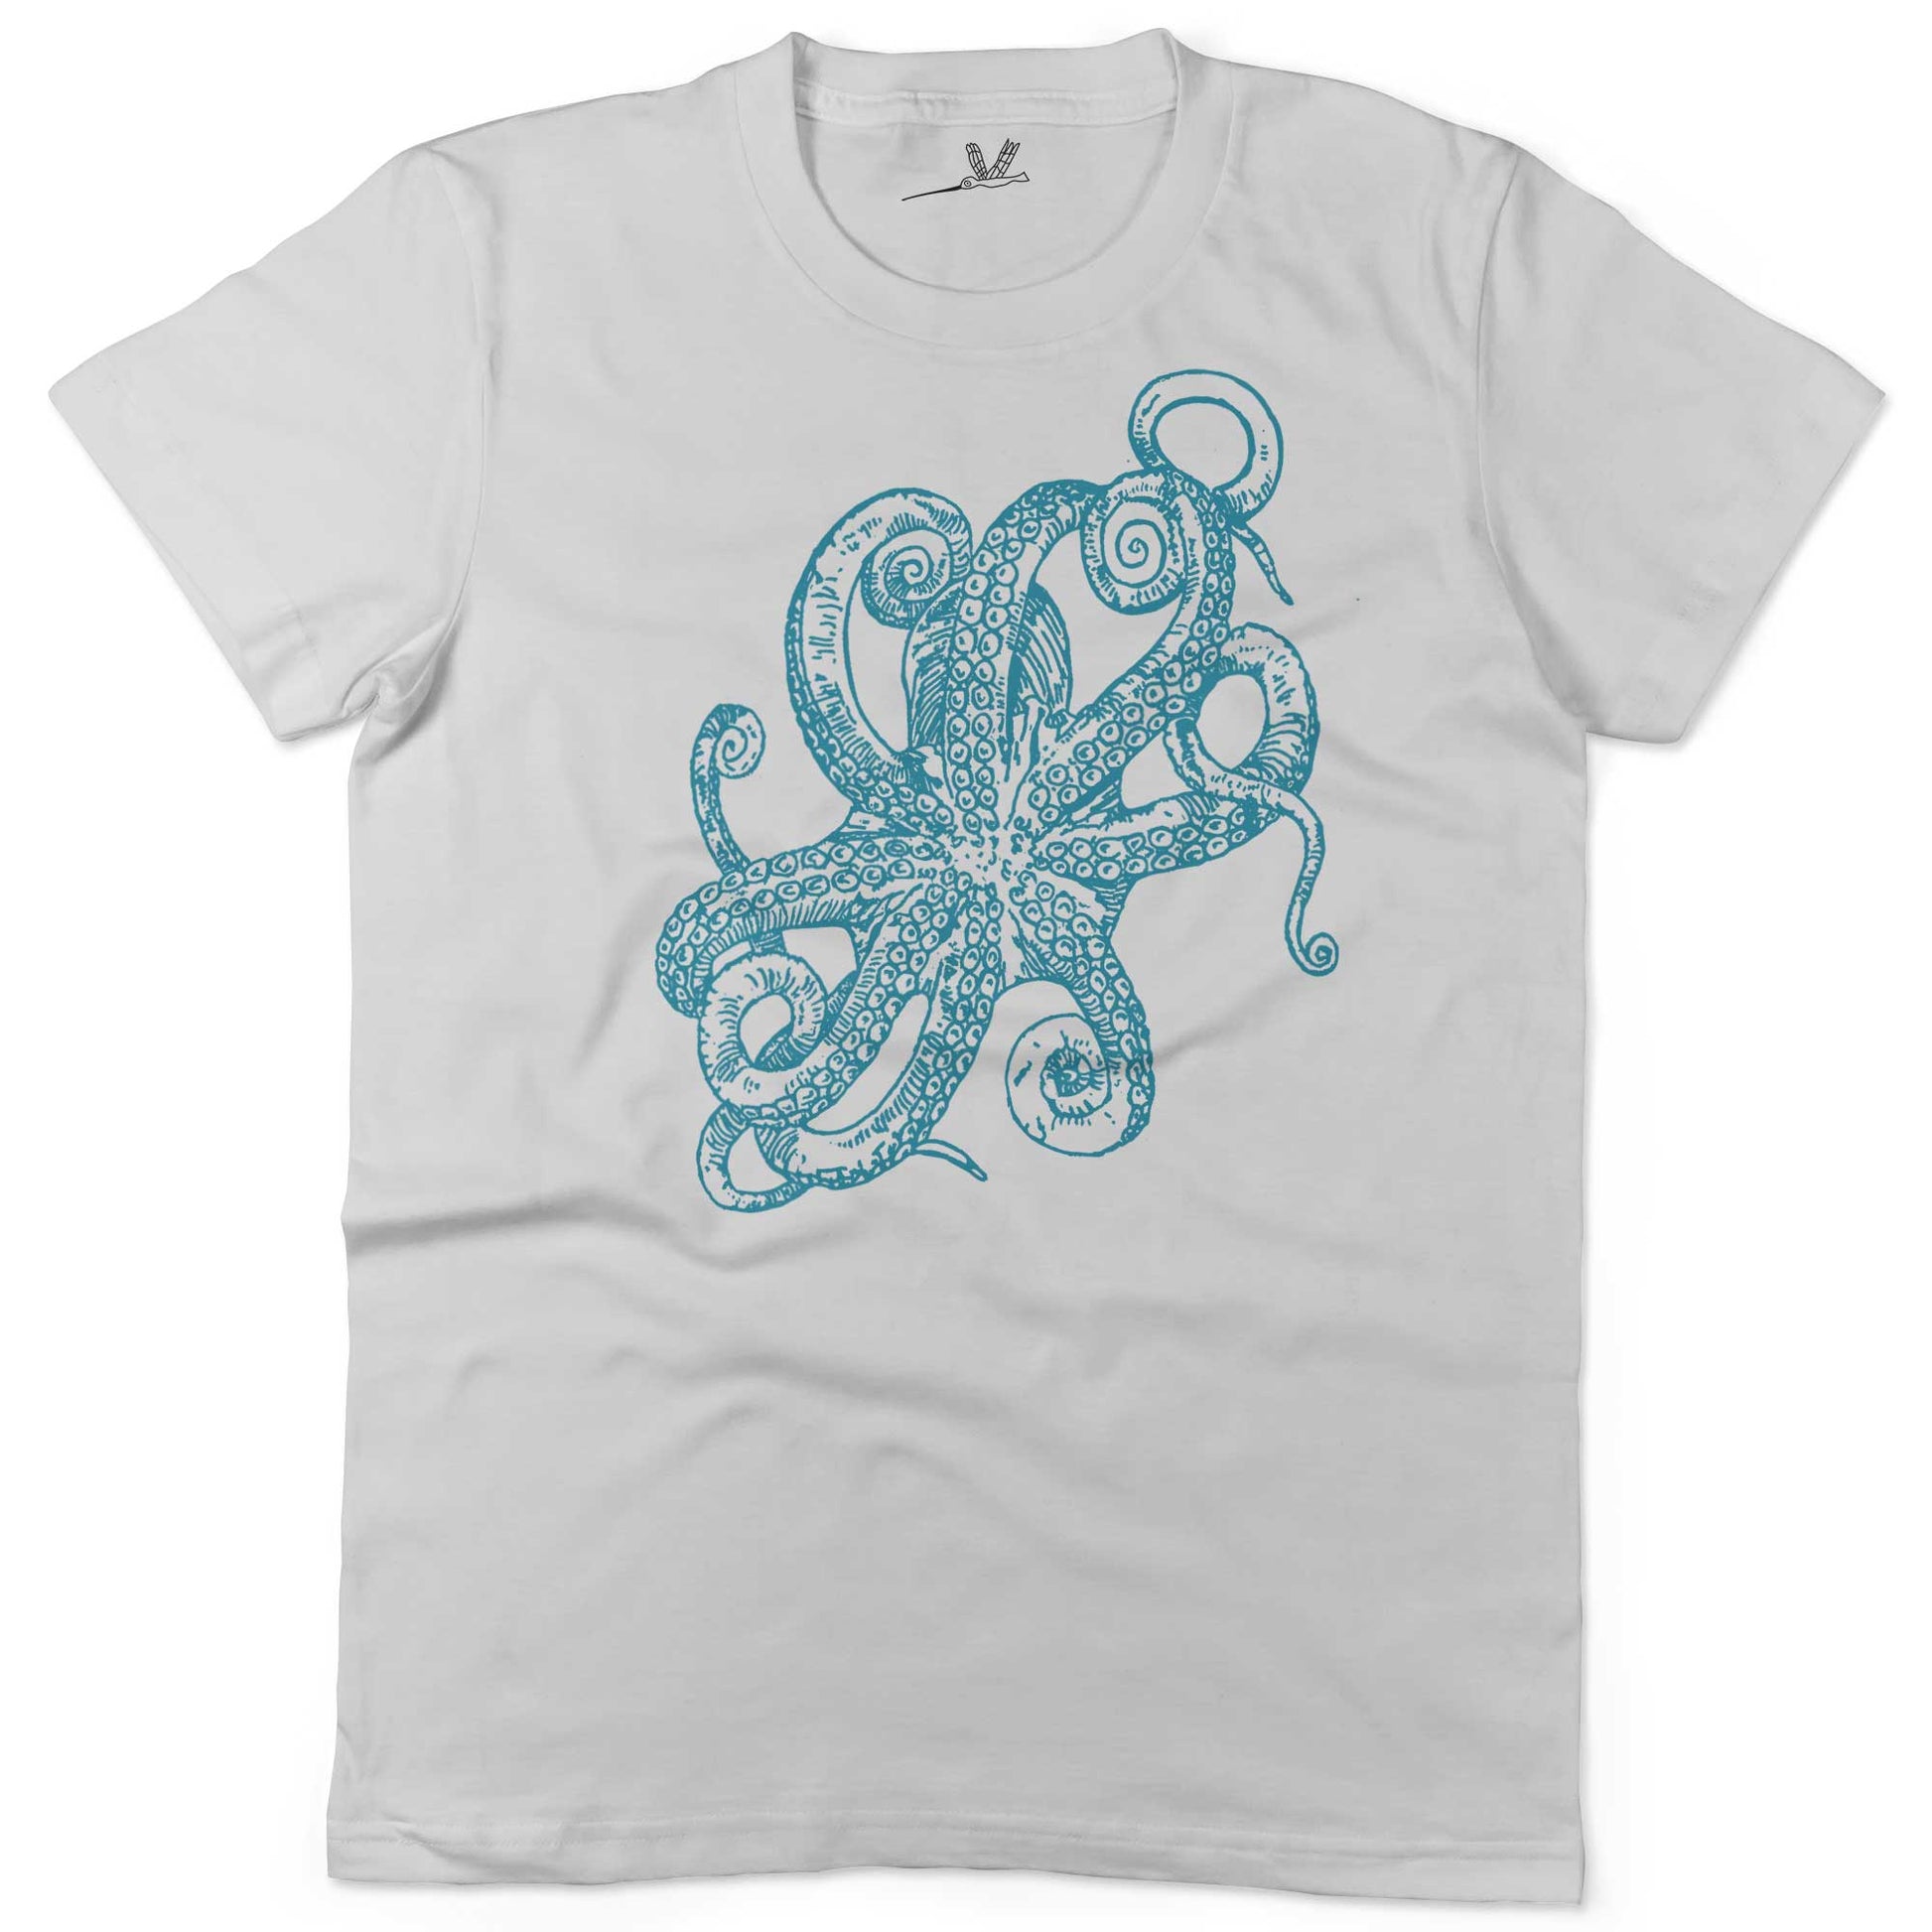 Octopus Underbelly Unisex Or Women's Cotton T-shirt-White-Woman